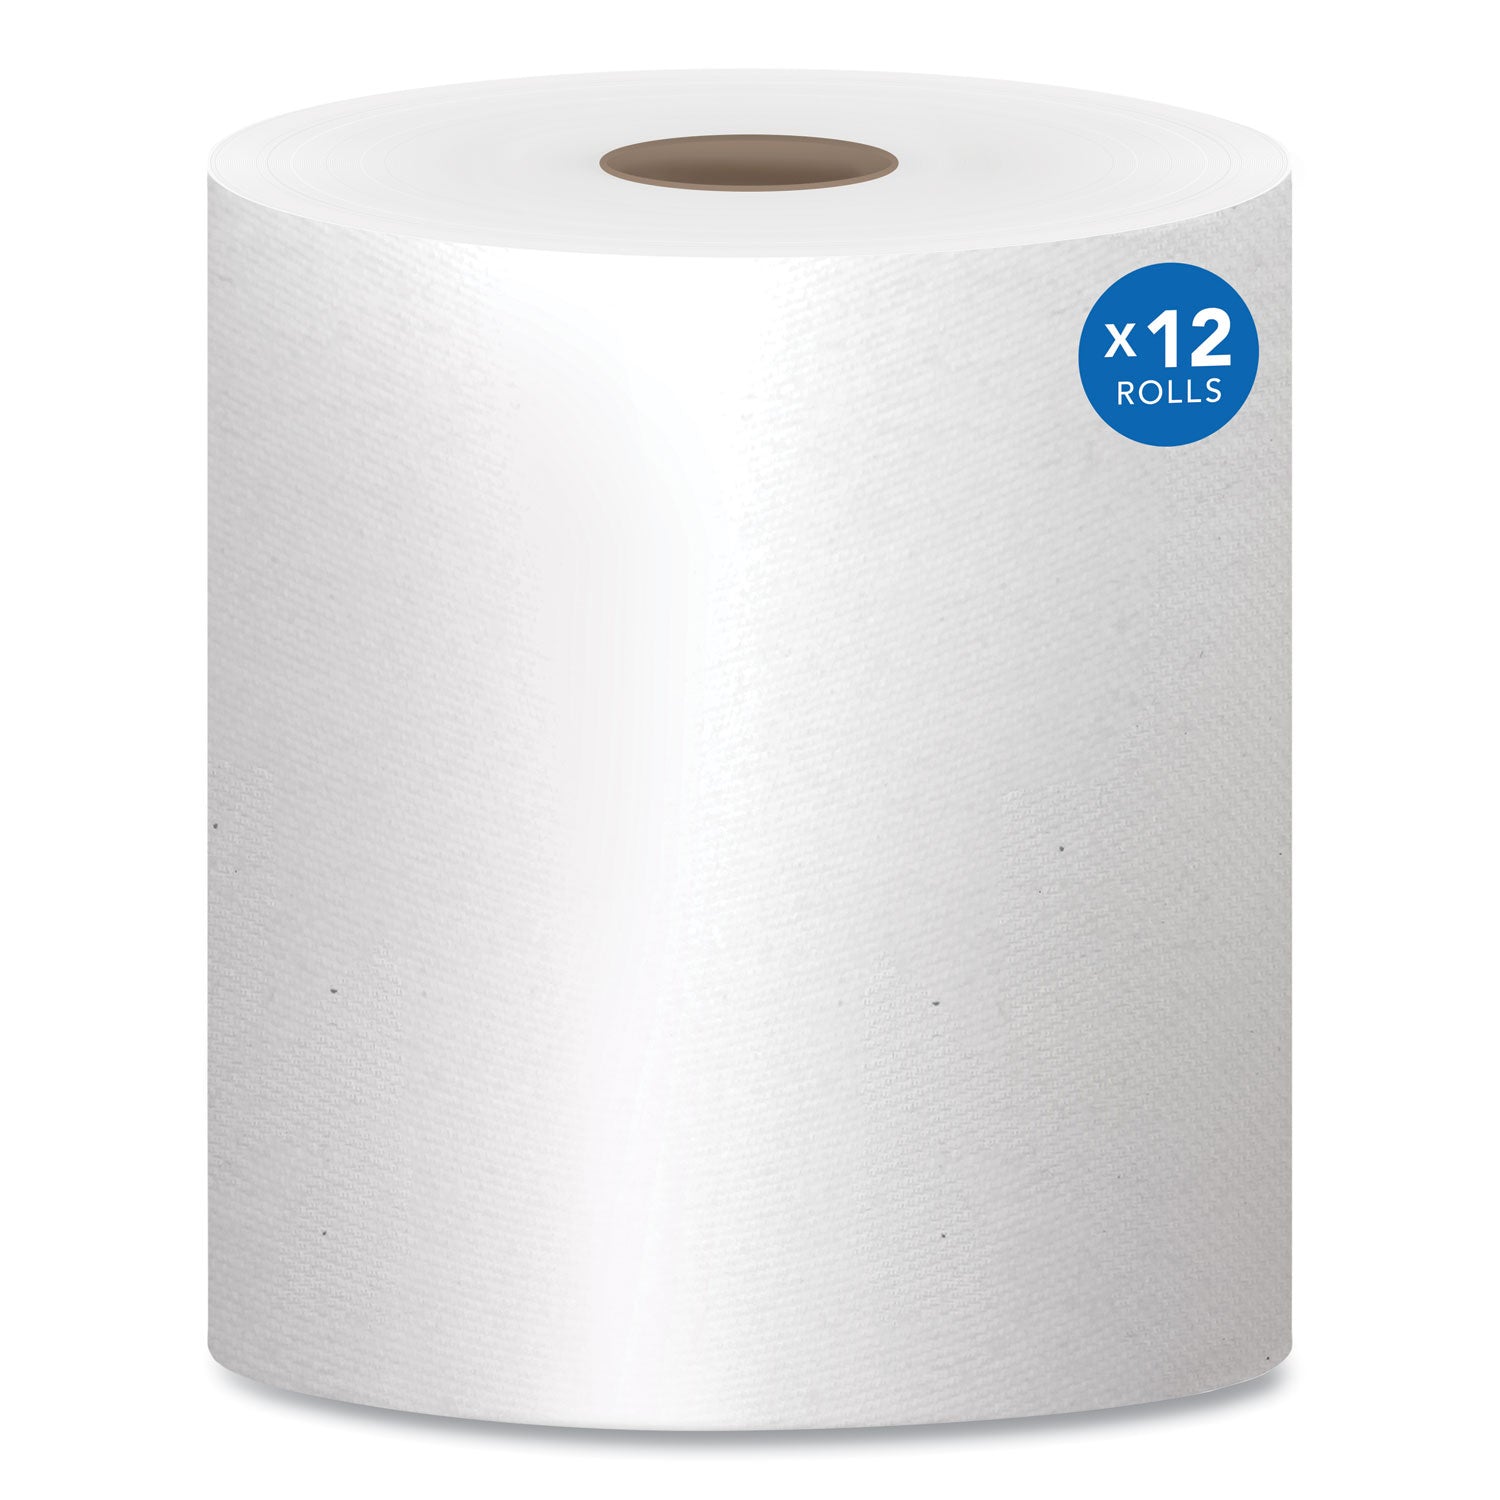 Essential High Capacity Hard Roll Towels for Business, Absorbency Pockets, 1-Ply, 8" x 1,000 ft, 1.5" Core, White,12 Rolls/CT - 